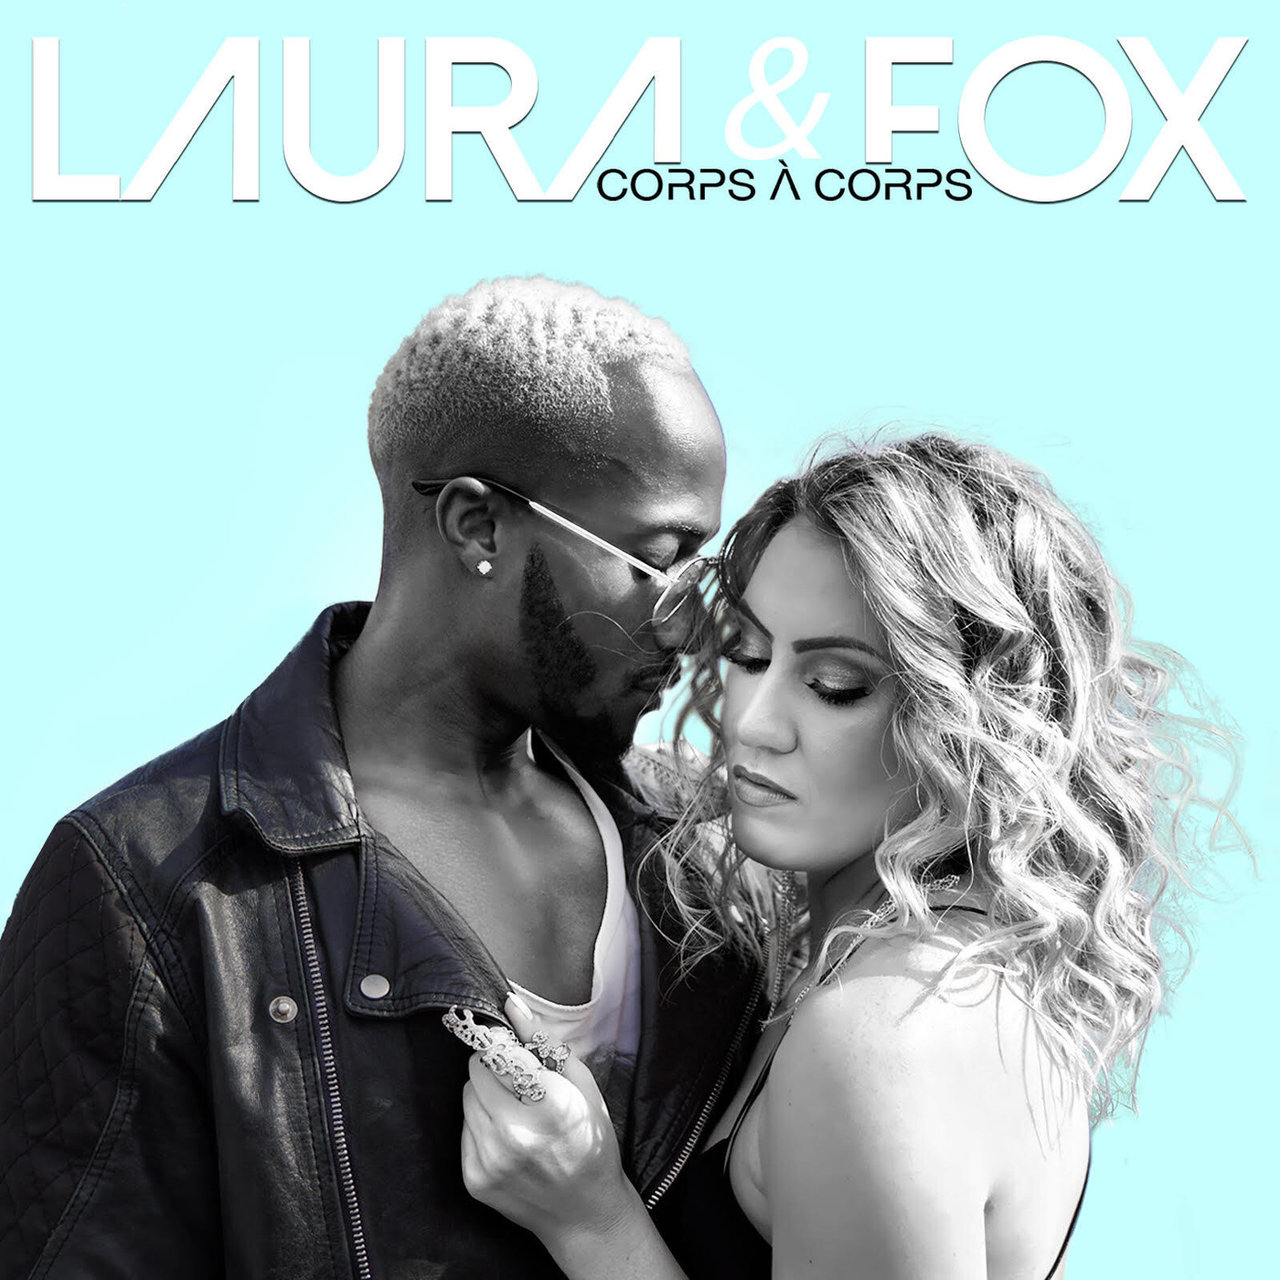 Laura featuring Fox — Corps à corps cover artwork